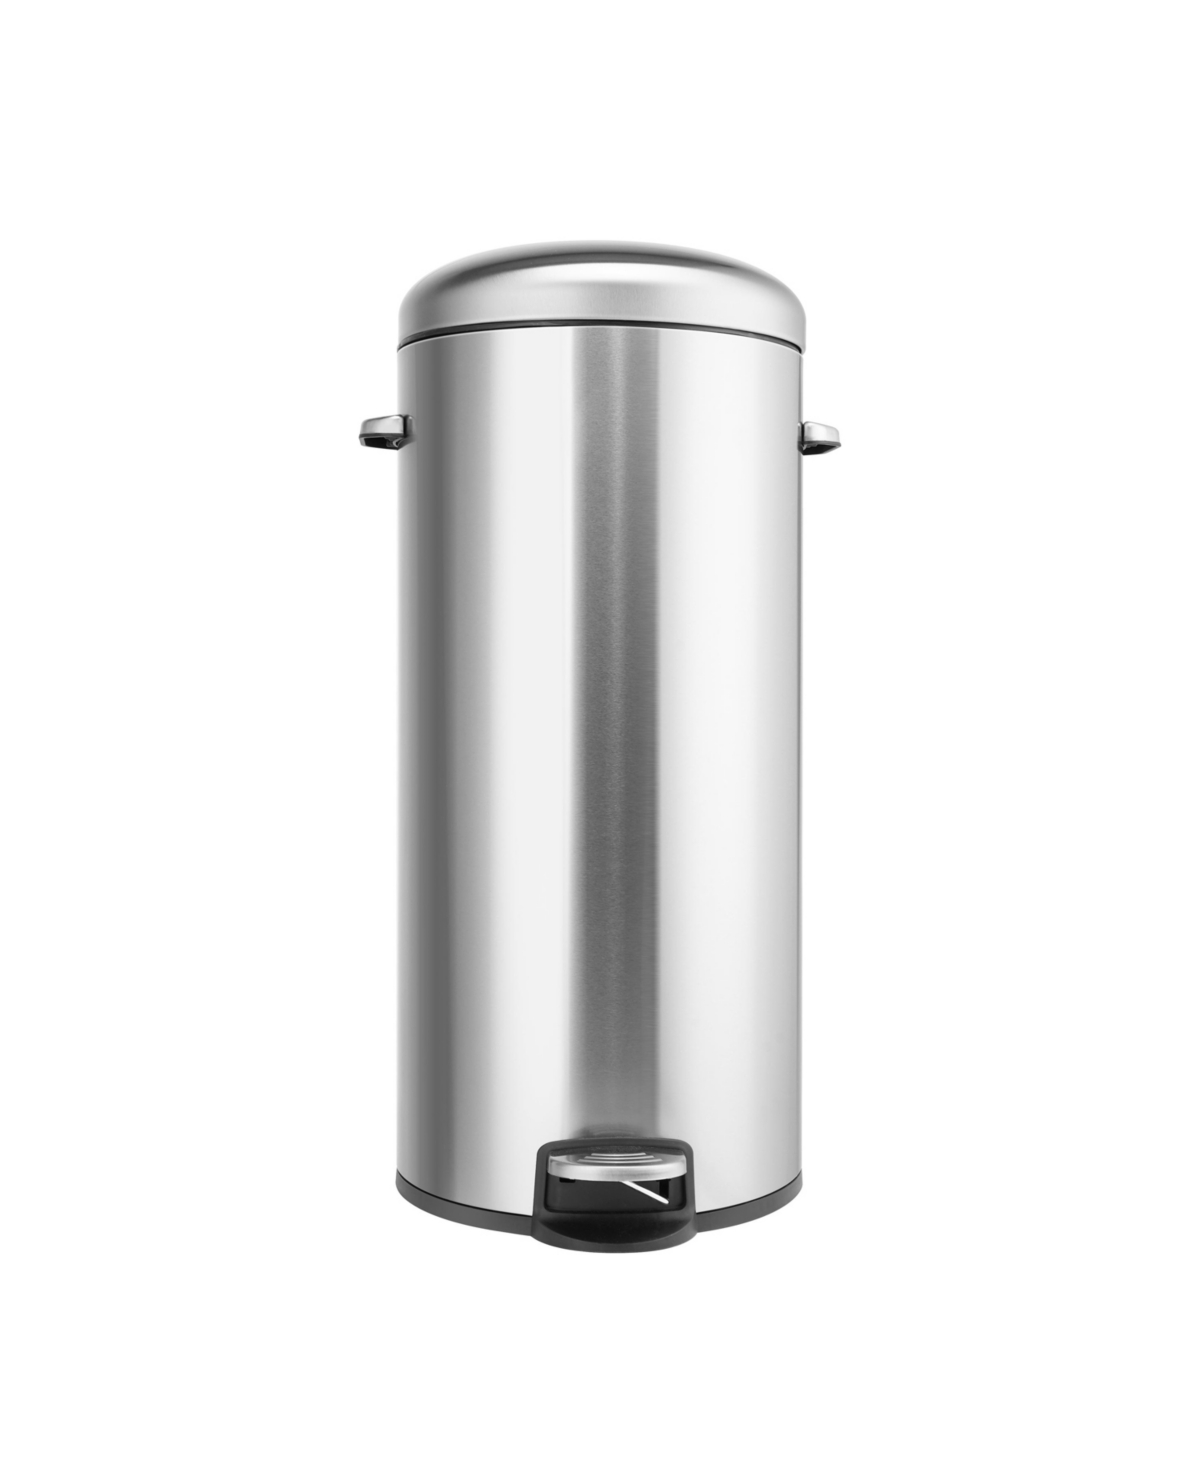 8 Gal./30 Liter Stainless Steel Round Shape Step-on Trash Can for Kitchen - Silver